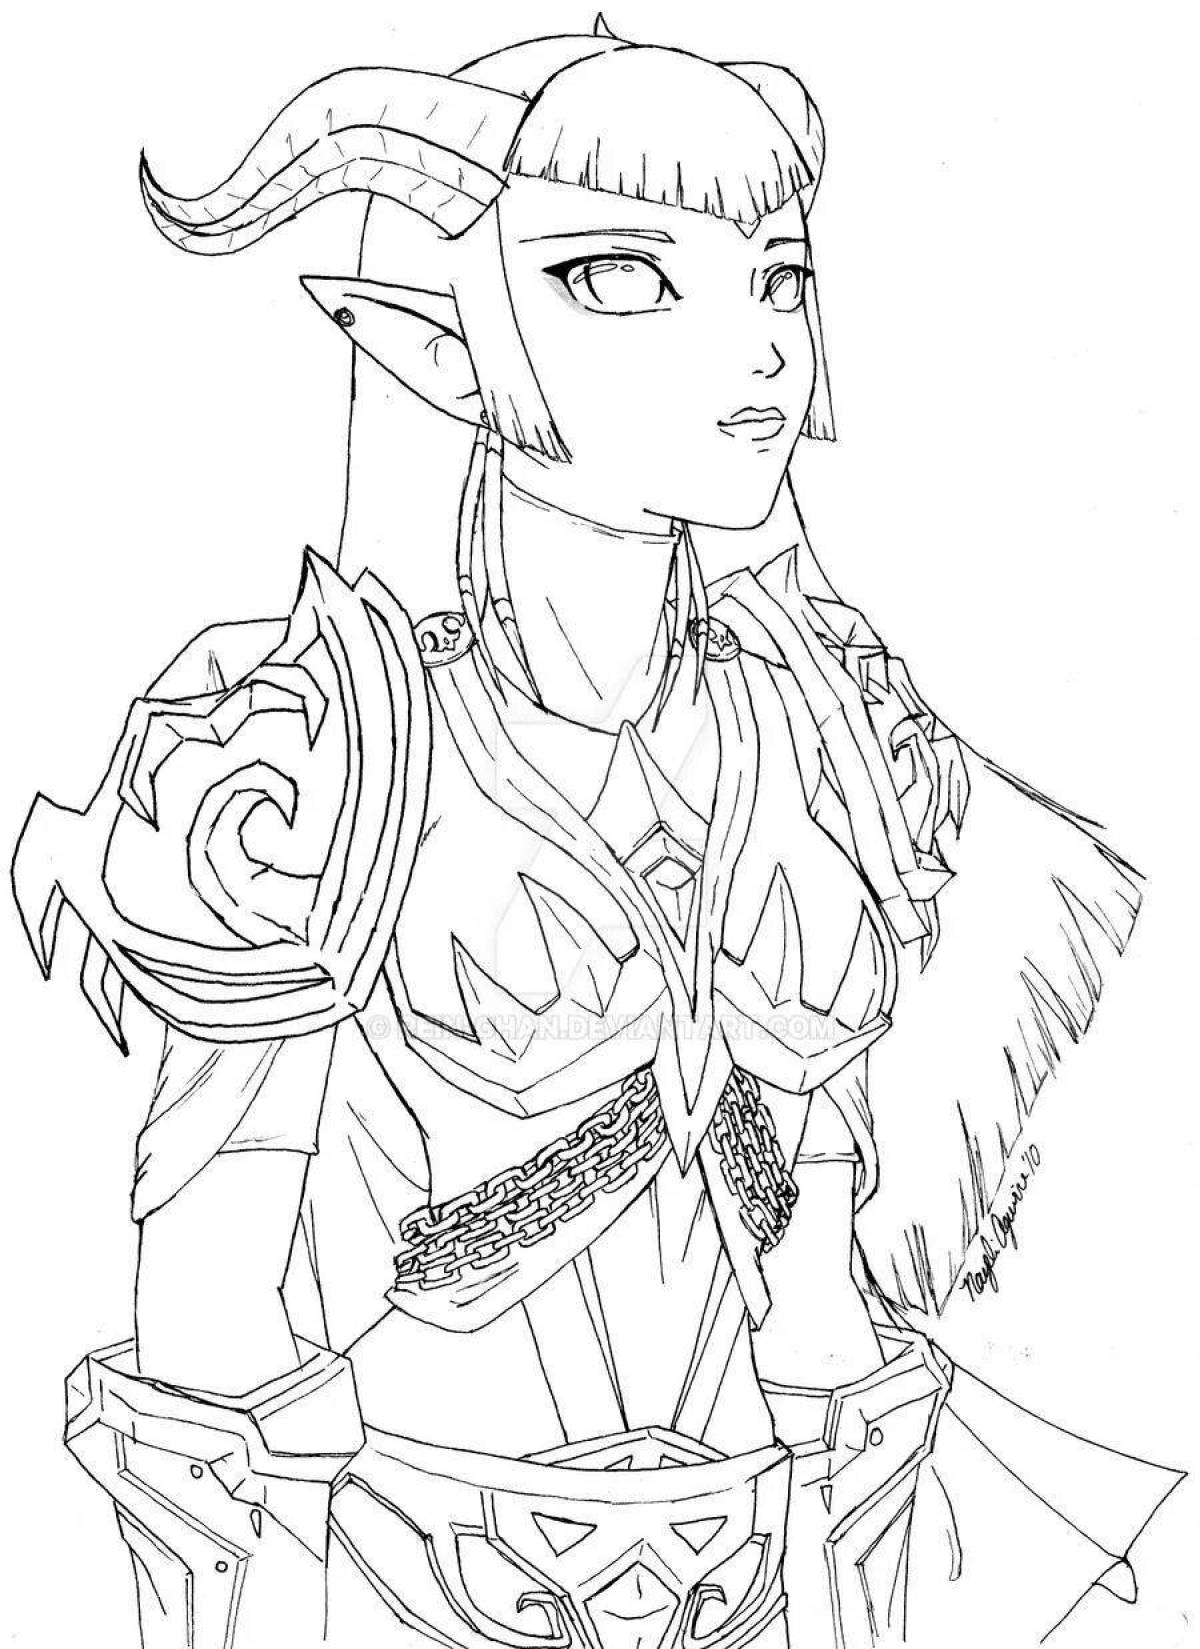 World of warcraft glitter coloring pages